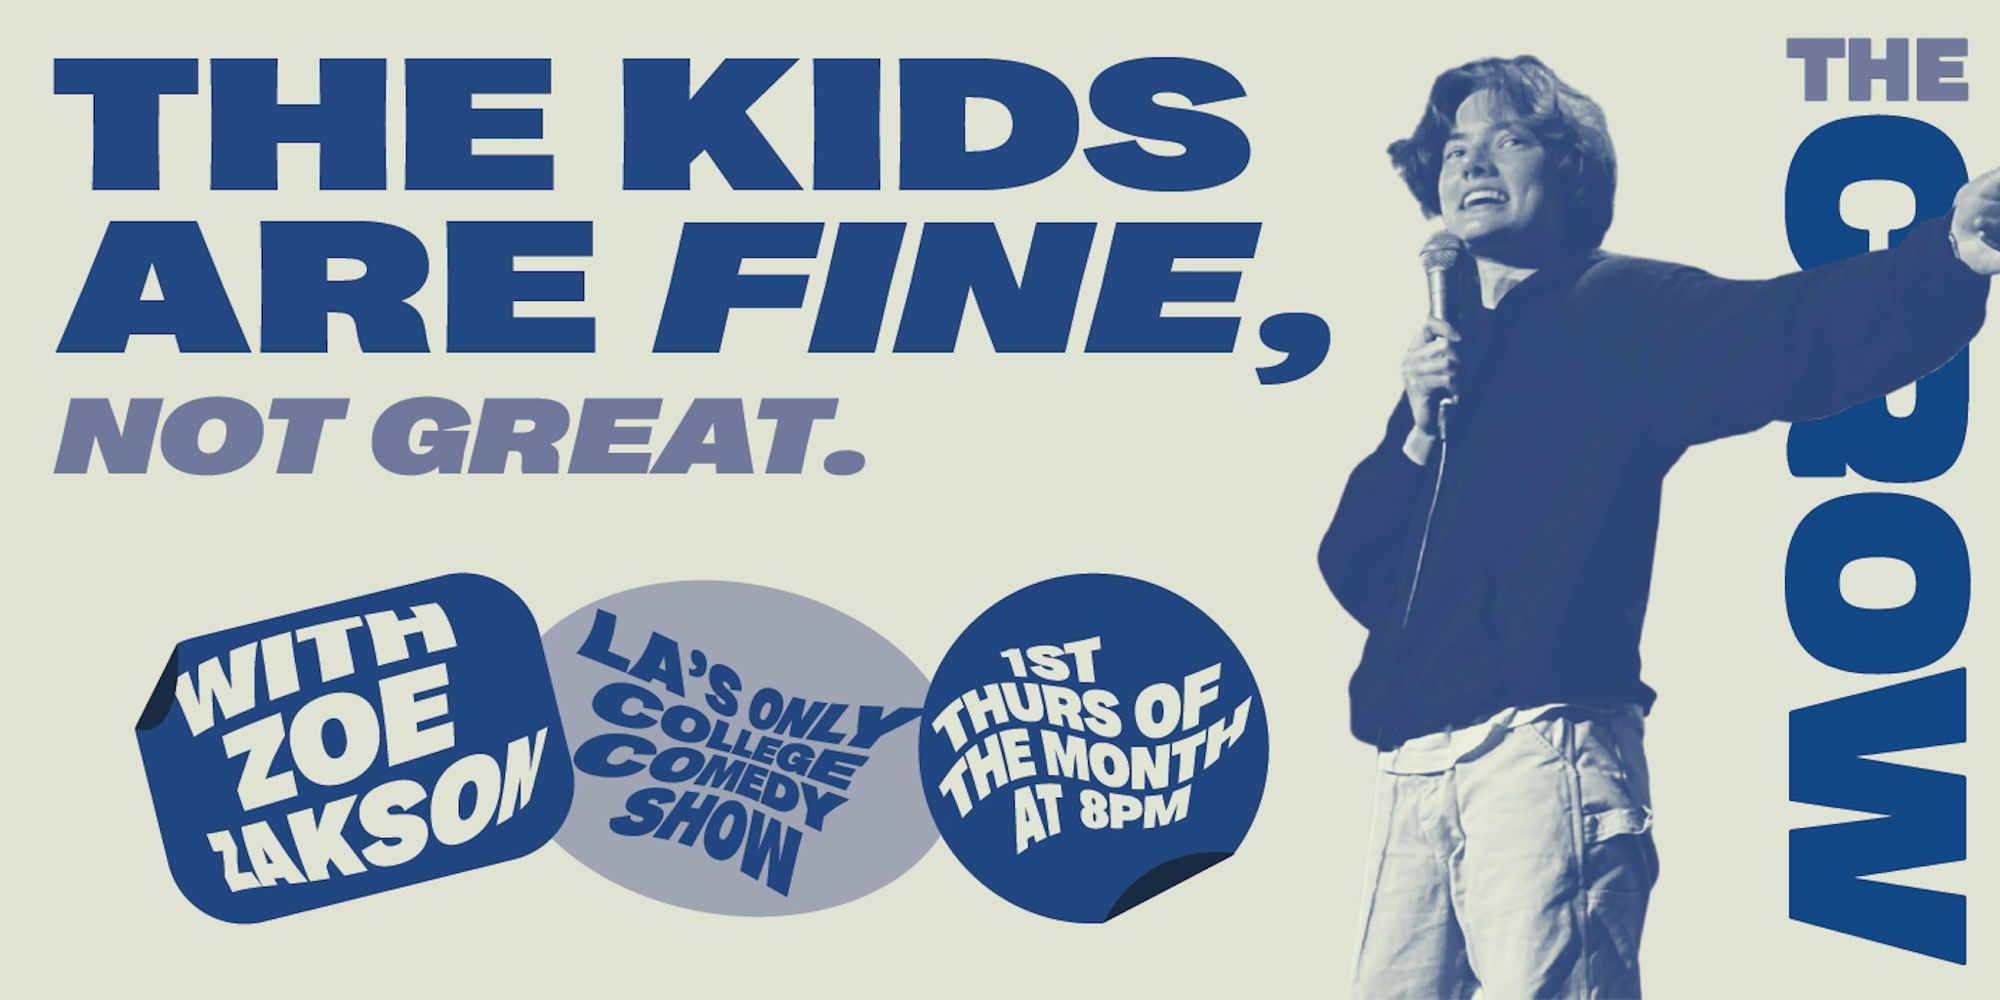 The Kids are Fine, Not Great (College Comedy Show) promotional image